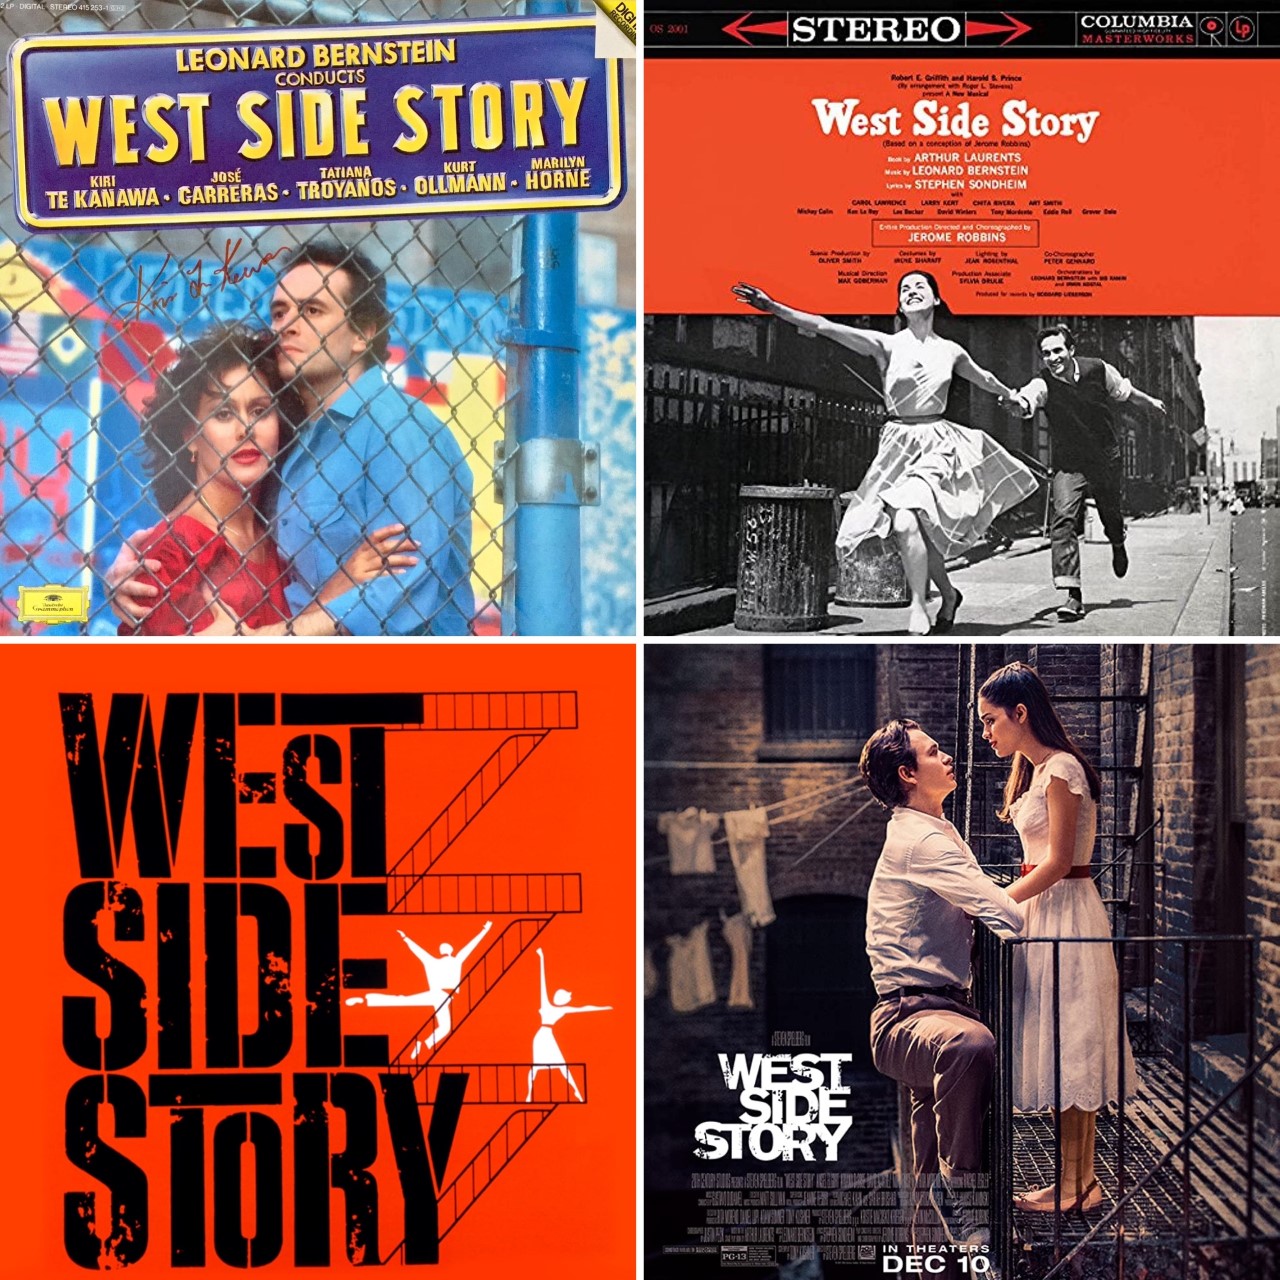 WEST-SIDE-STORY